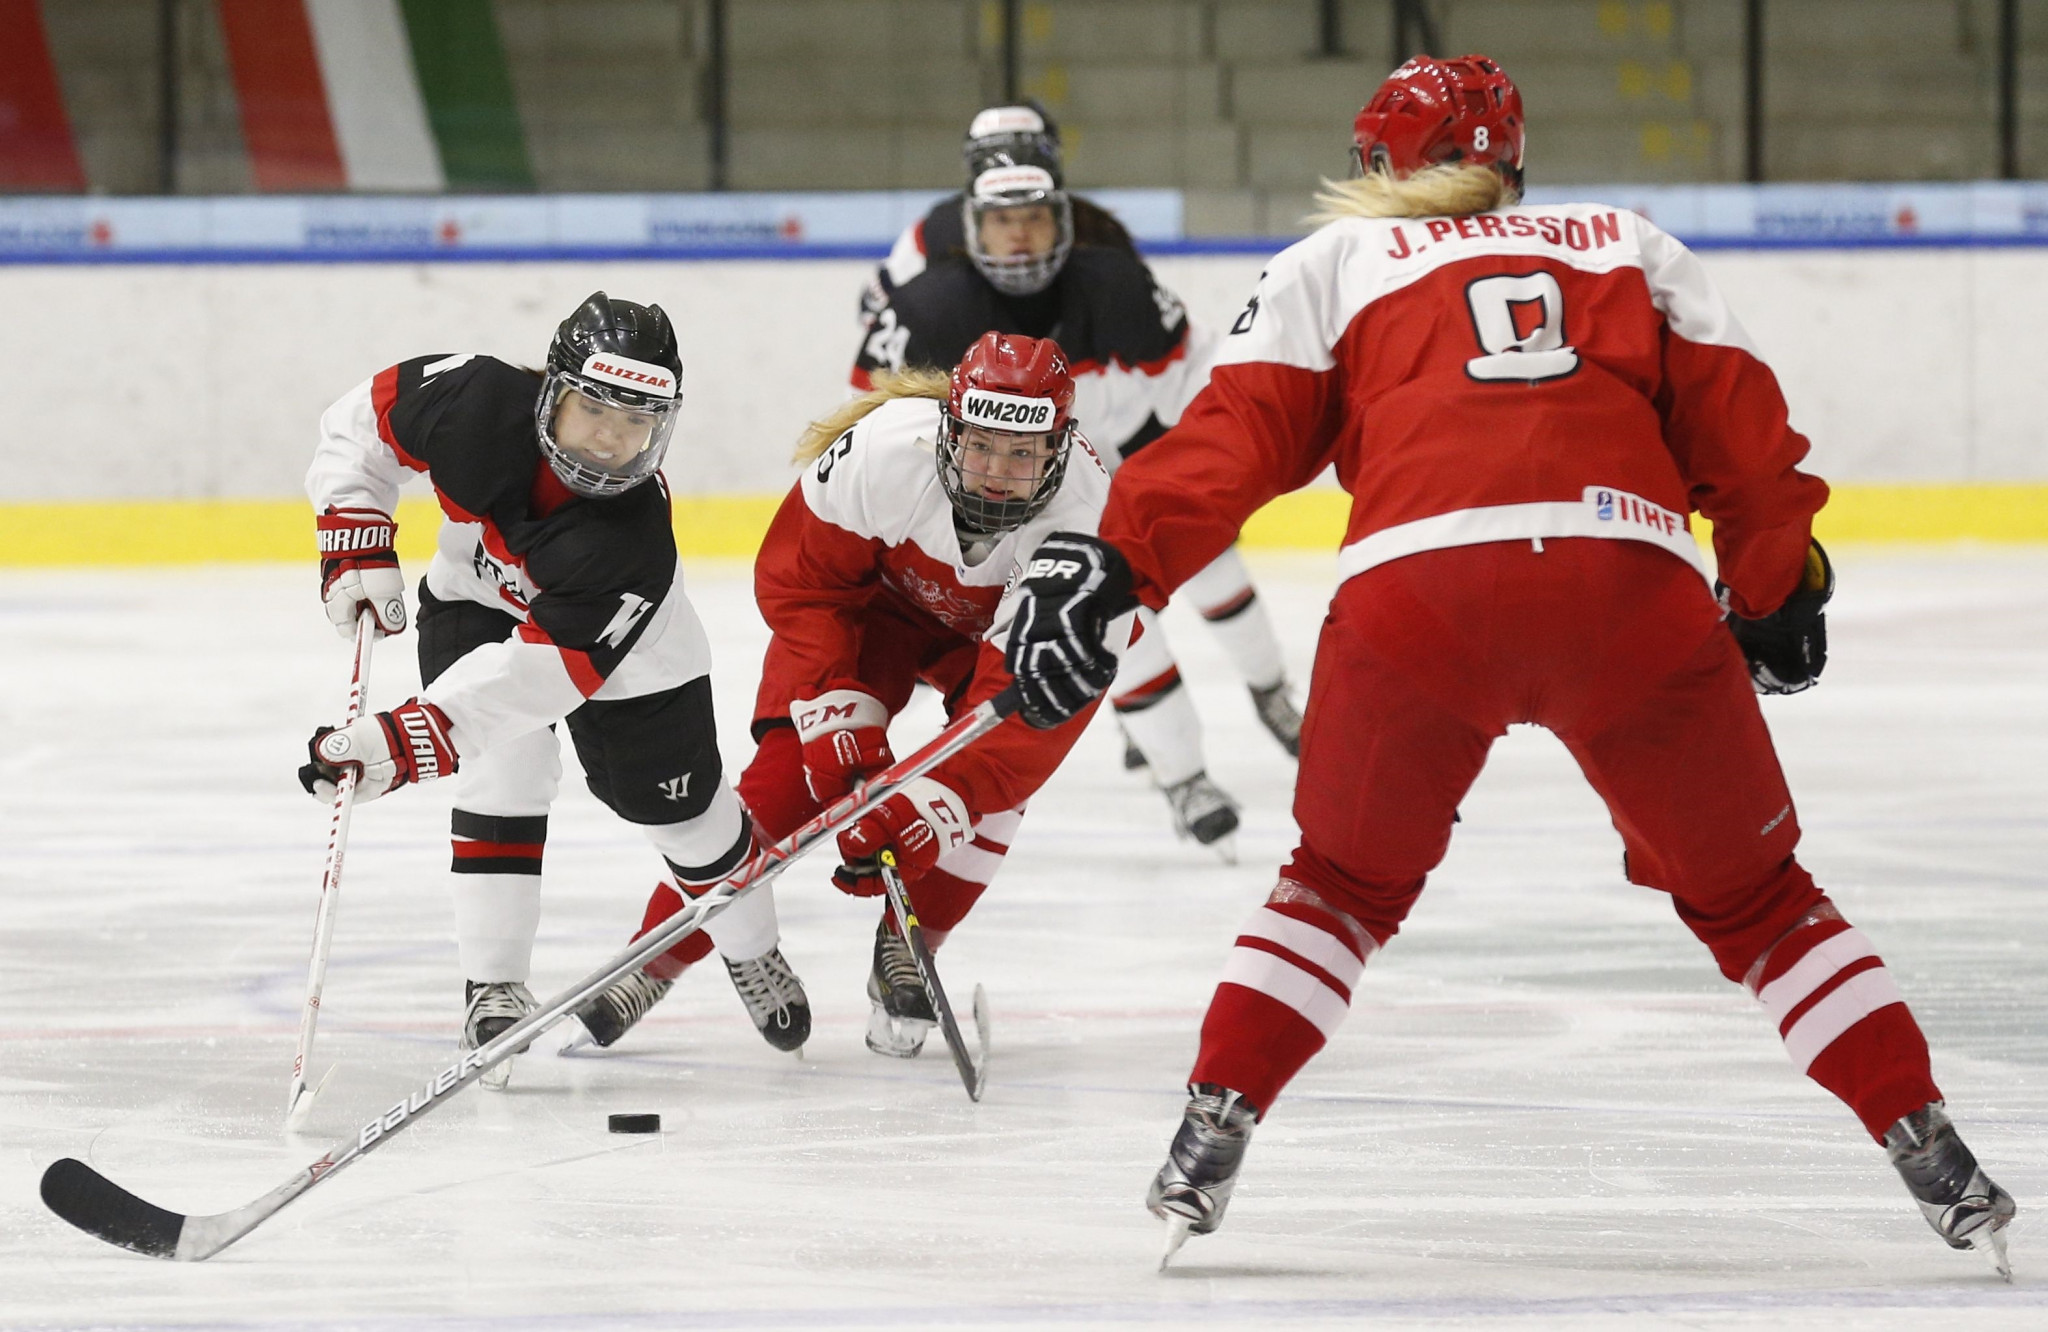 The IIHF is aiming to get more women involved in ice hockey ©Getty Images